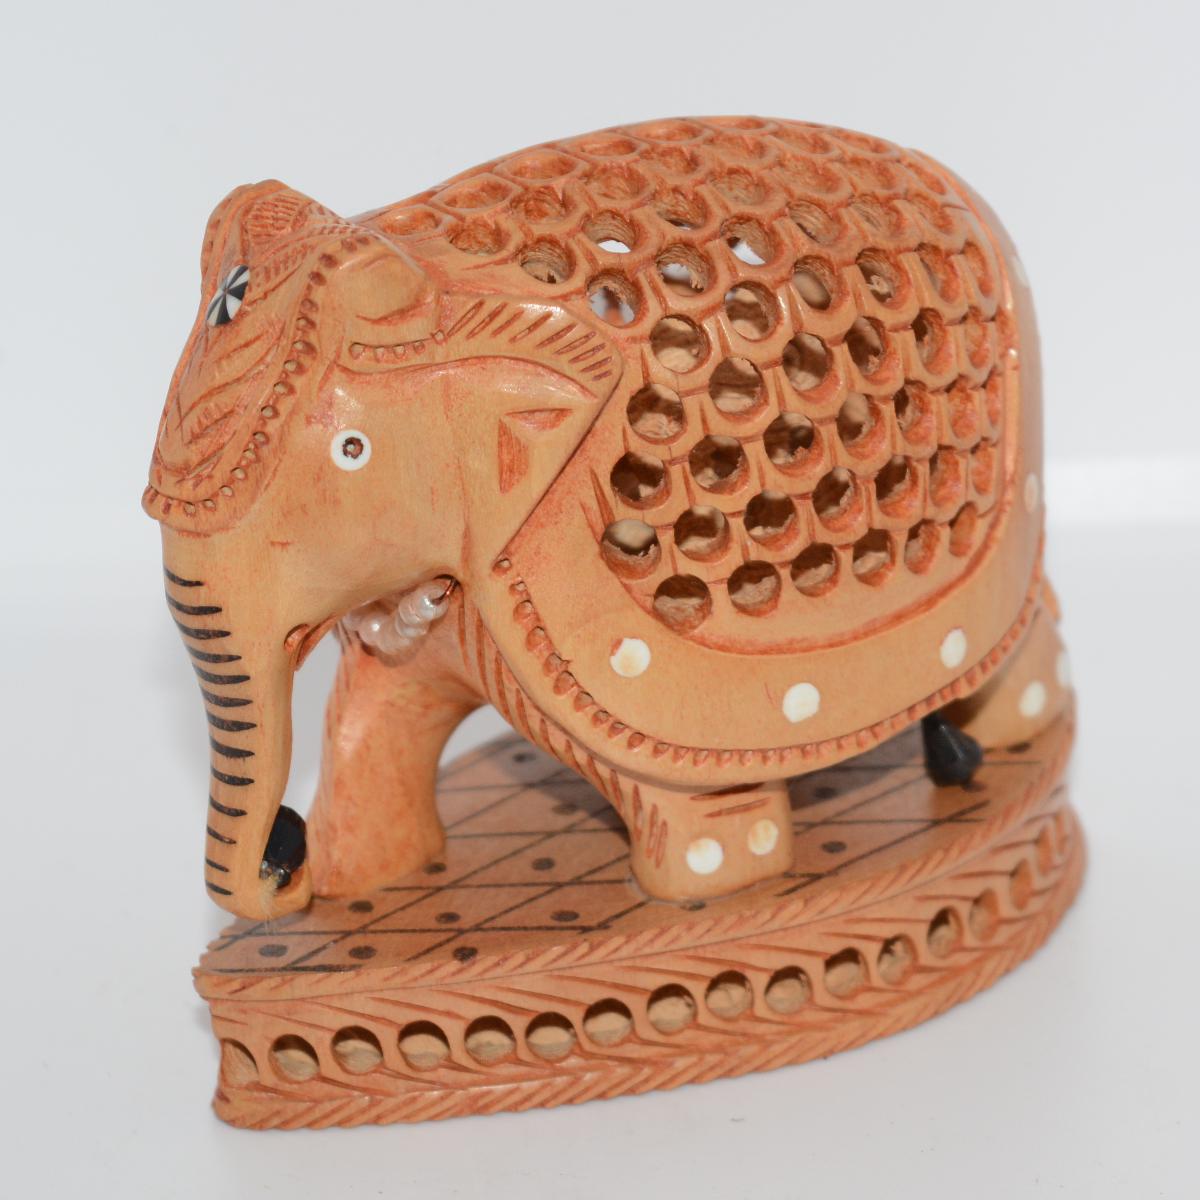 Channapatna Toy Wooden Carved Elephant With Calf Inside